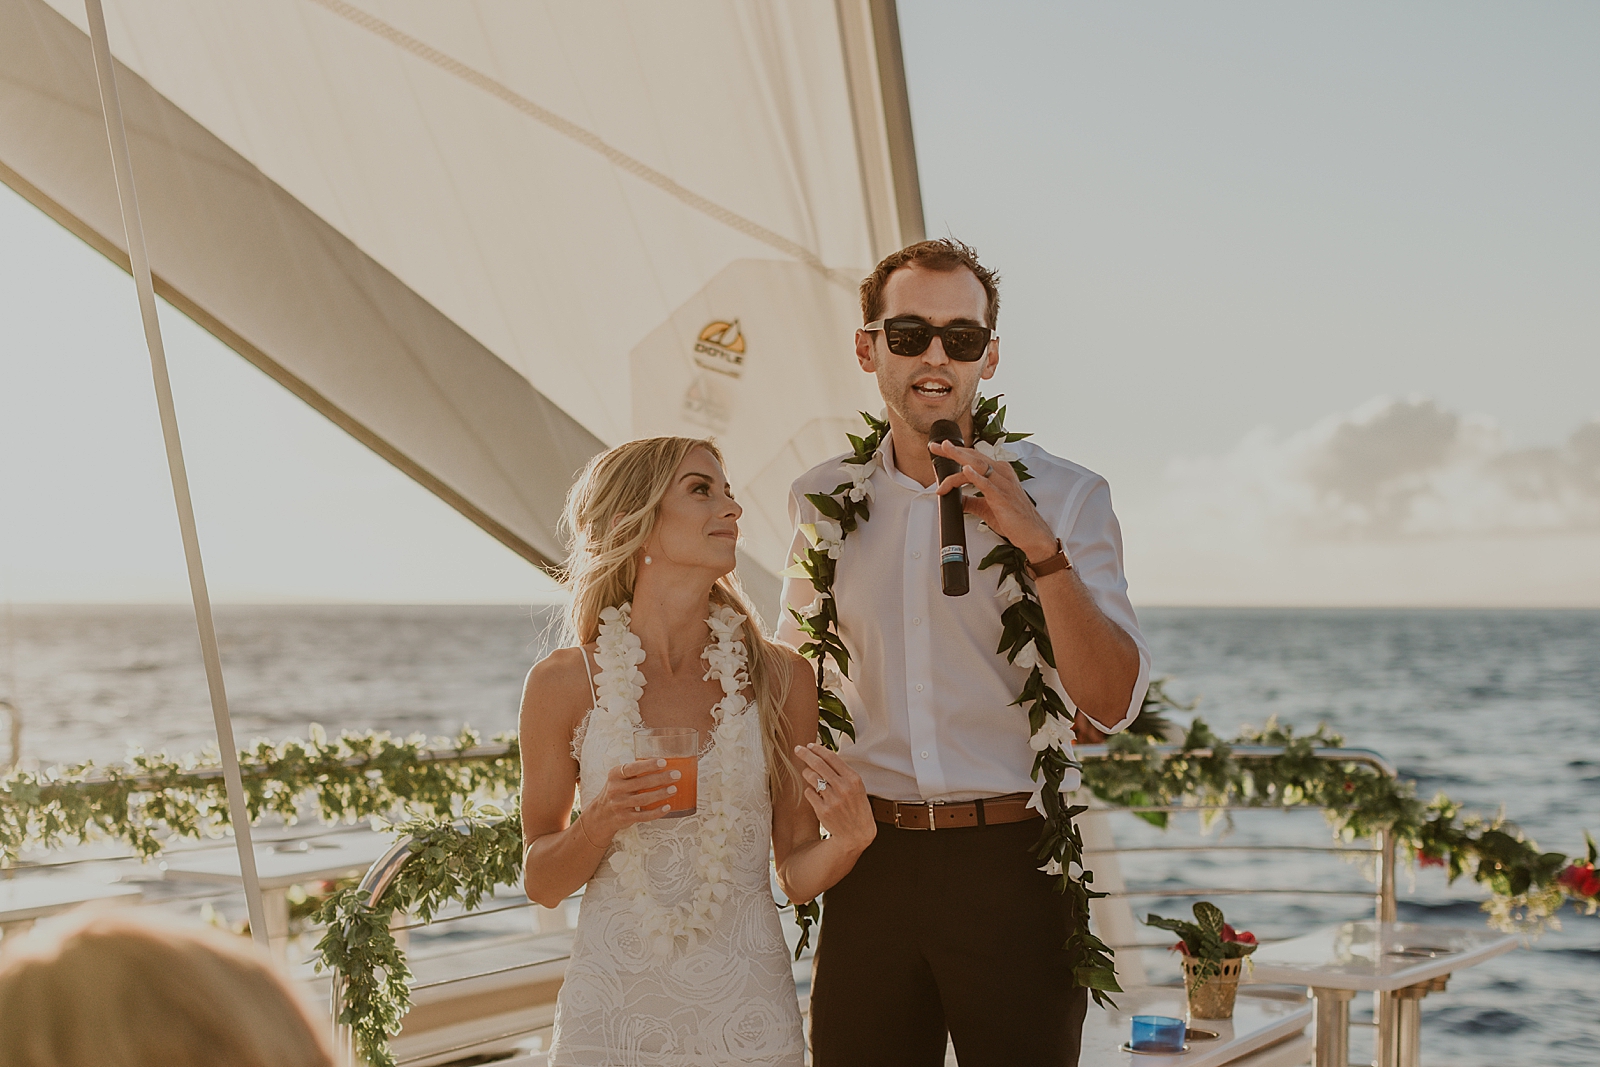 Groom giving speech with Bride next to him with the ocean behind them